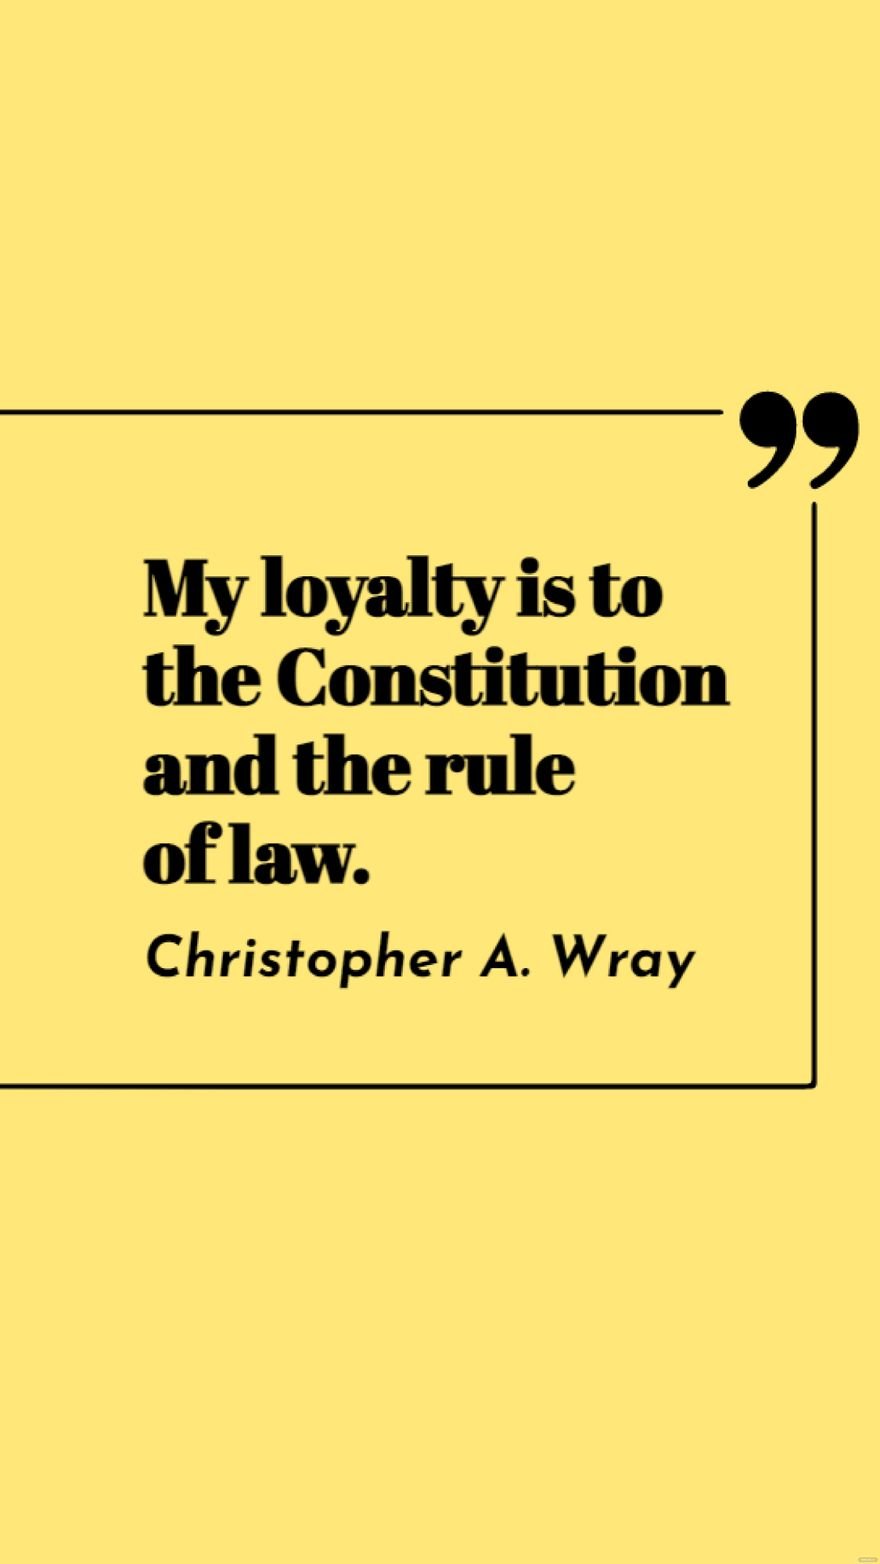 Free Christopher A. Wray - My loyalty is to the Constitution and the rule of law. in JPG